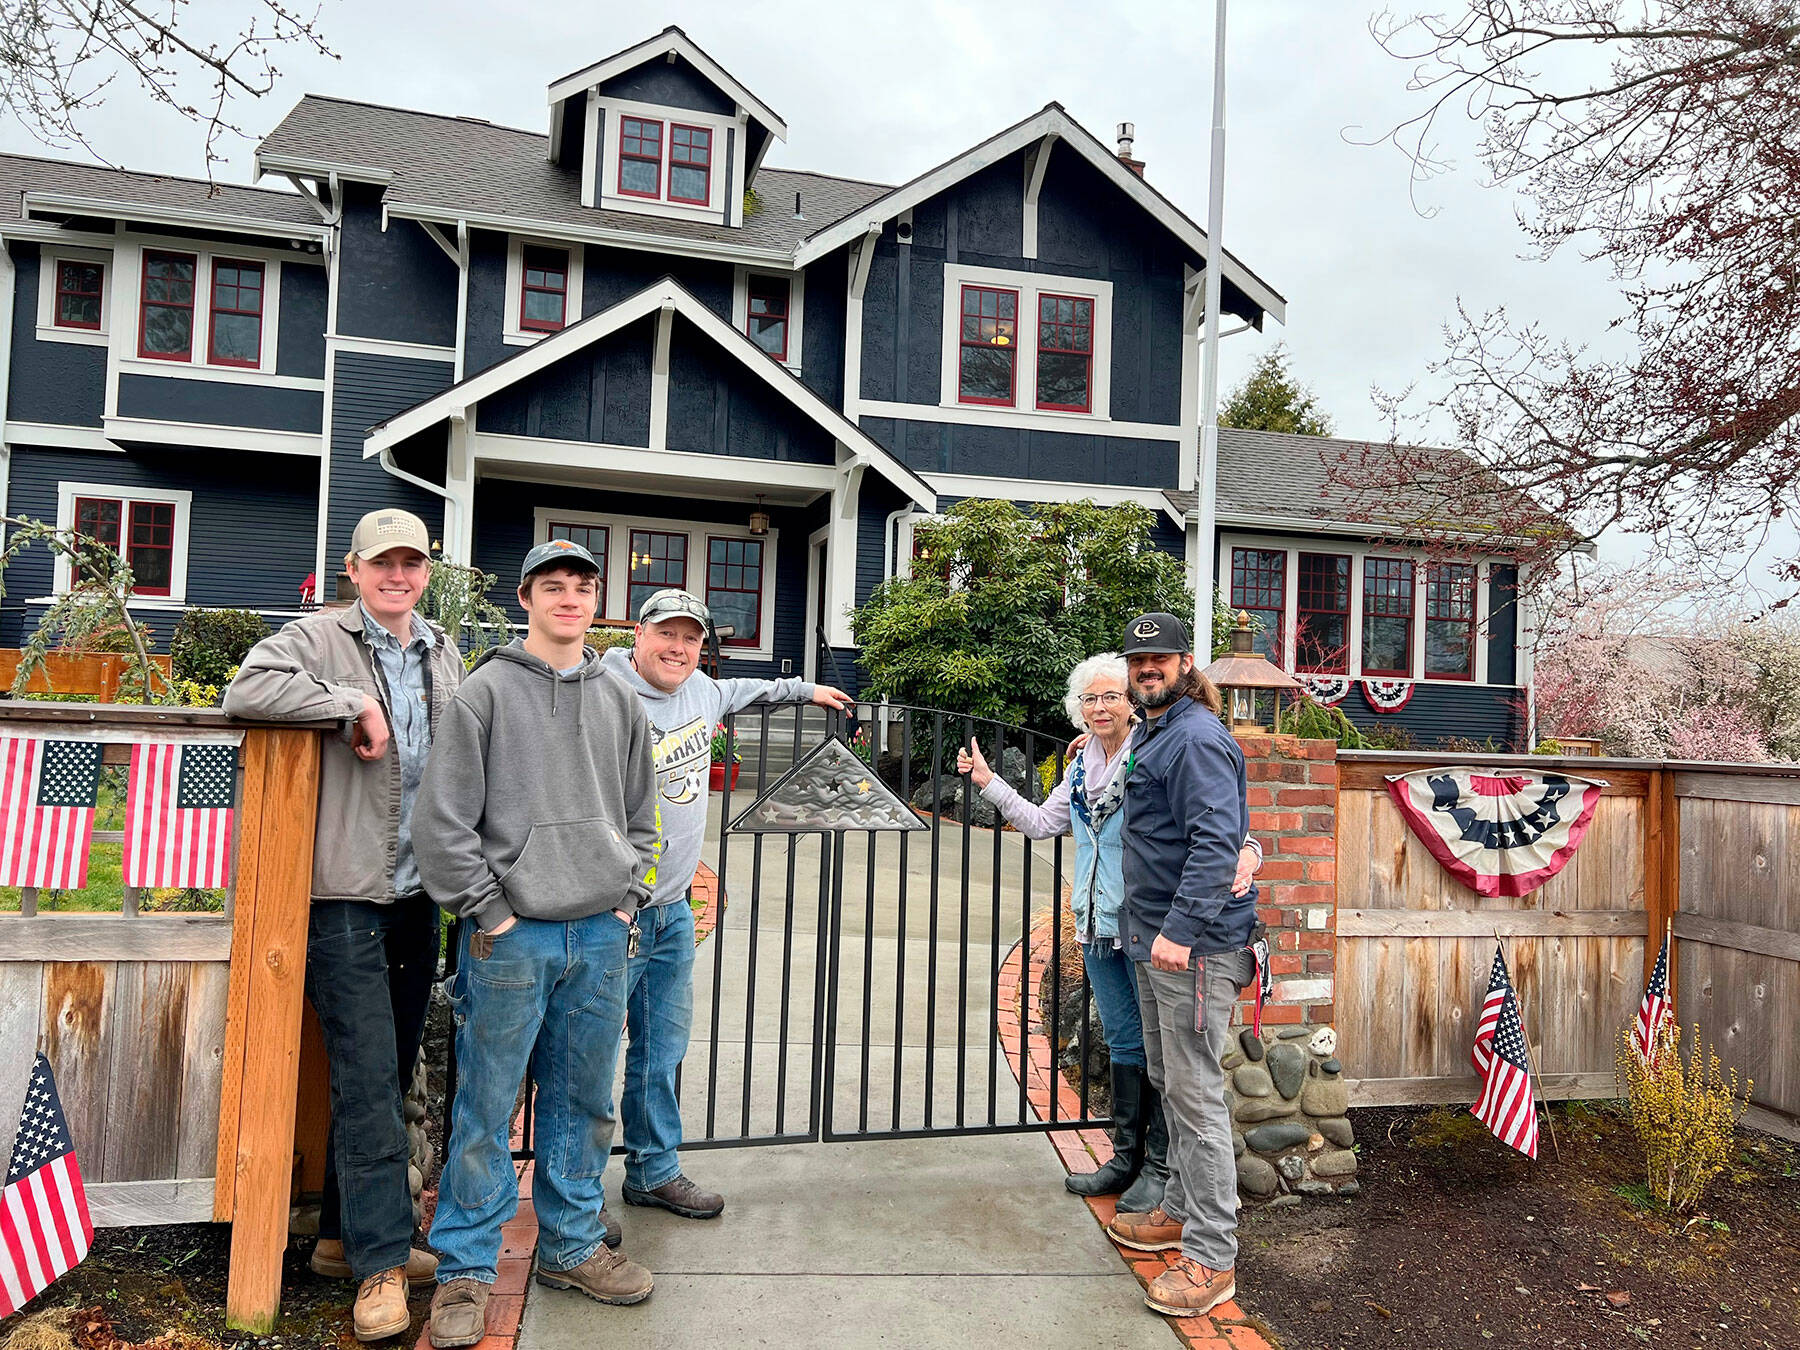 Pictured, from left to right, are Peninsula College students Blake Parker, James Hancock, welding instructor Eoin Doherty, Betsy Reed Schultz, and welding instructor Kelly Flanagan.